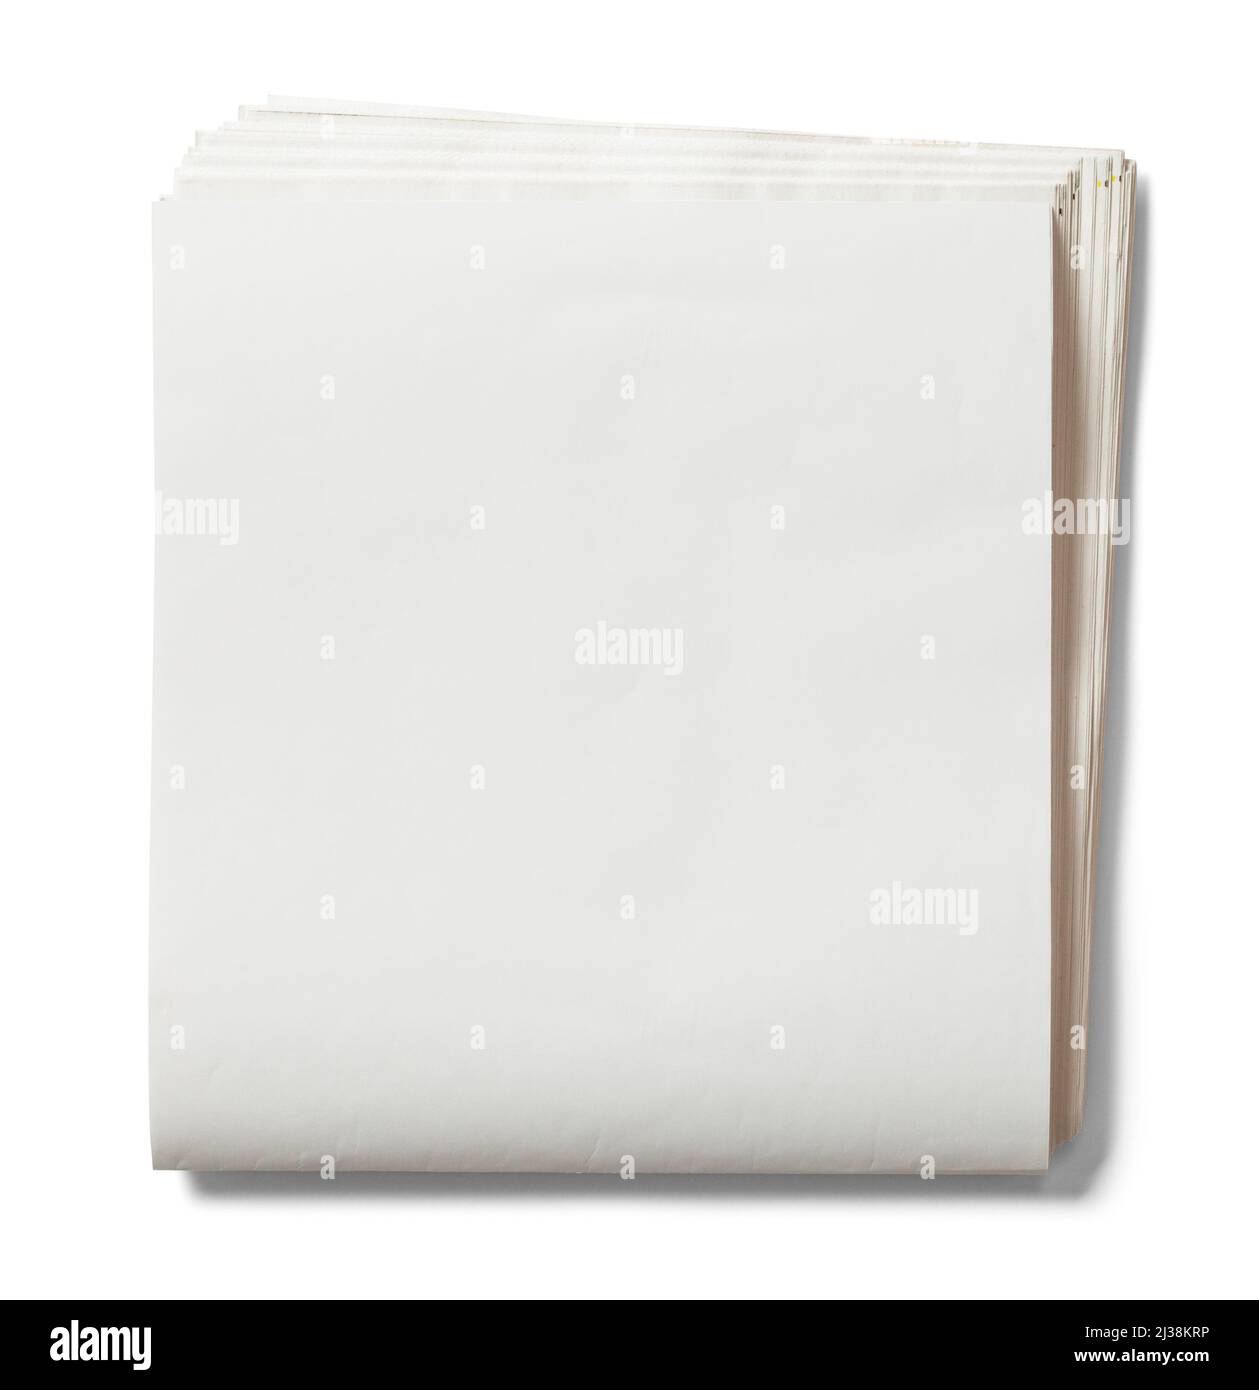 Folded Newspaper with Copy Space Cut Out on White. Stock Photo